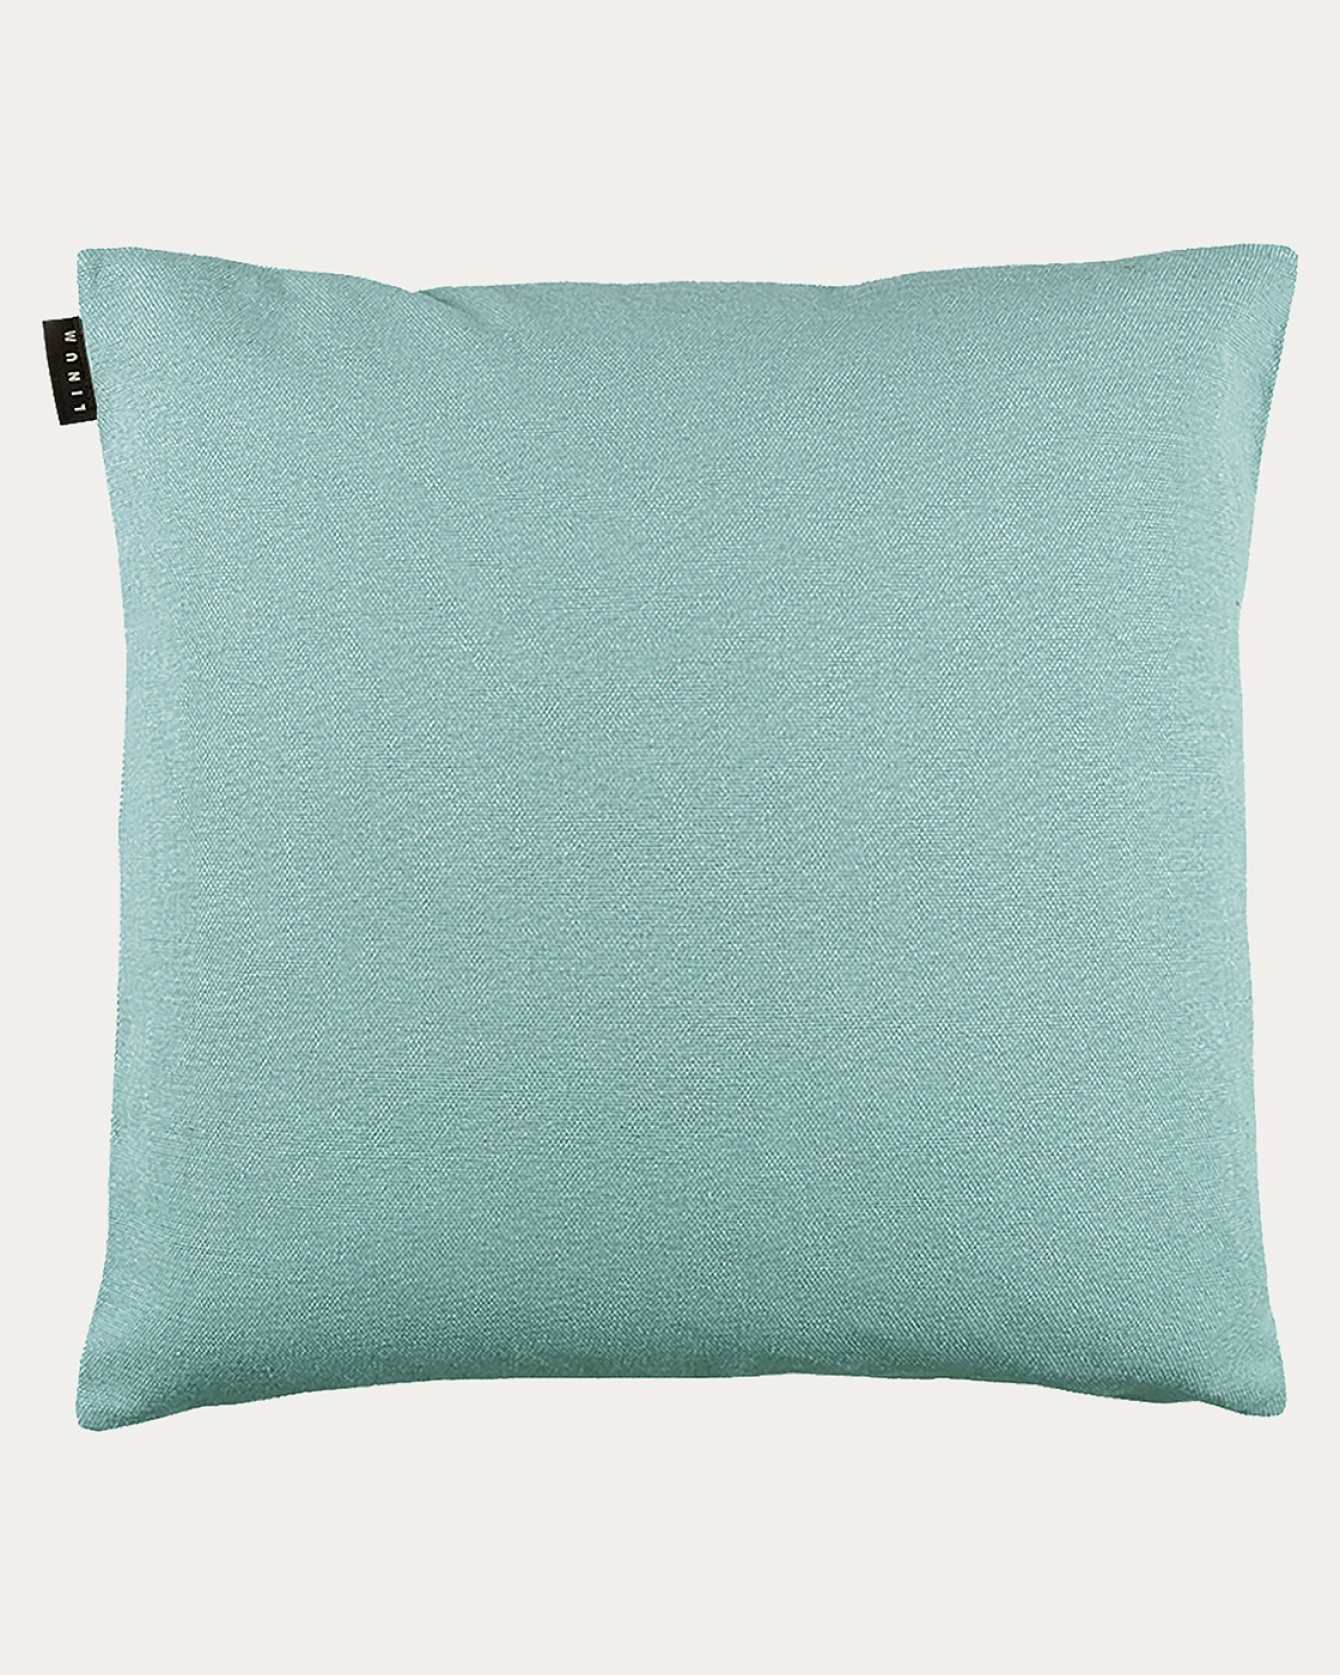 PEPPER Cushion cover 60x60 cm Dusty turquoise